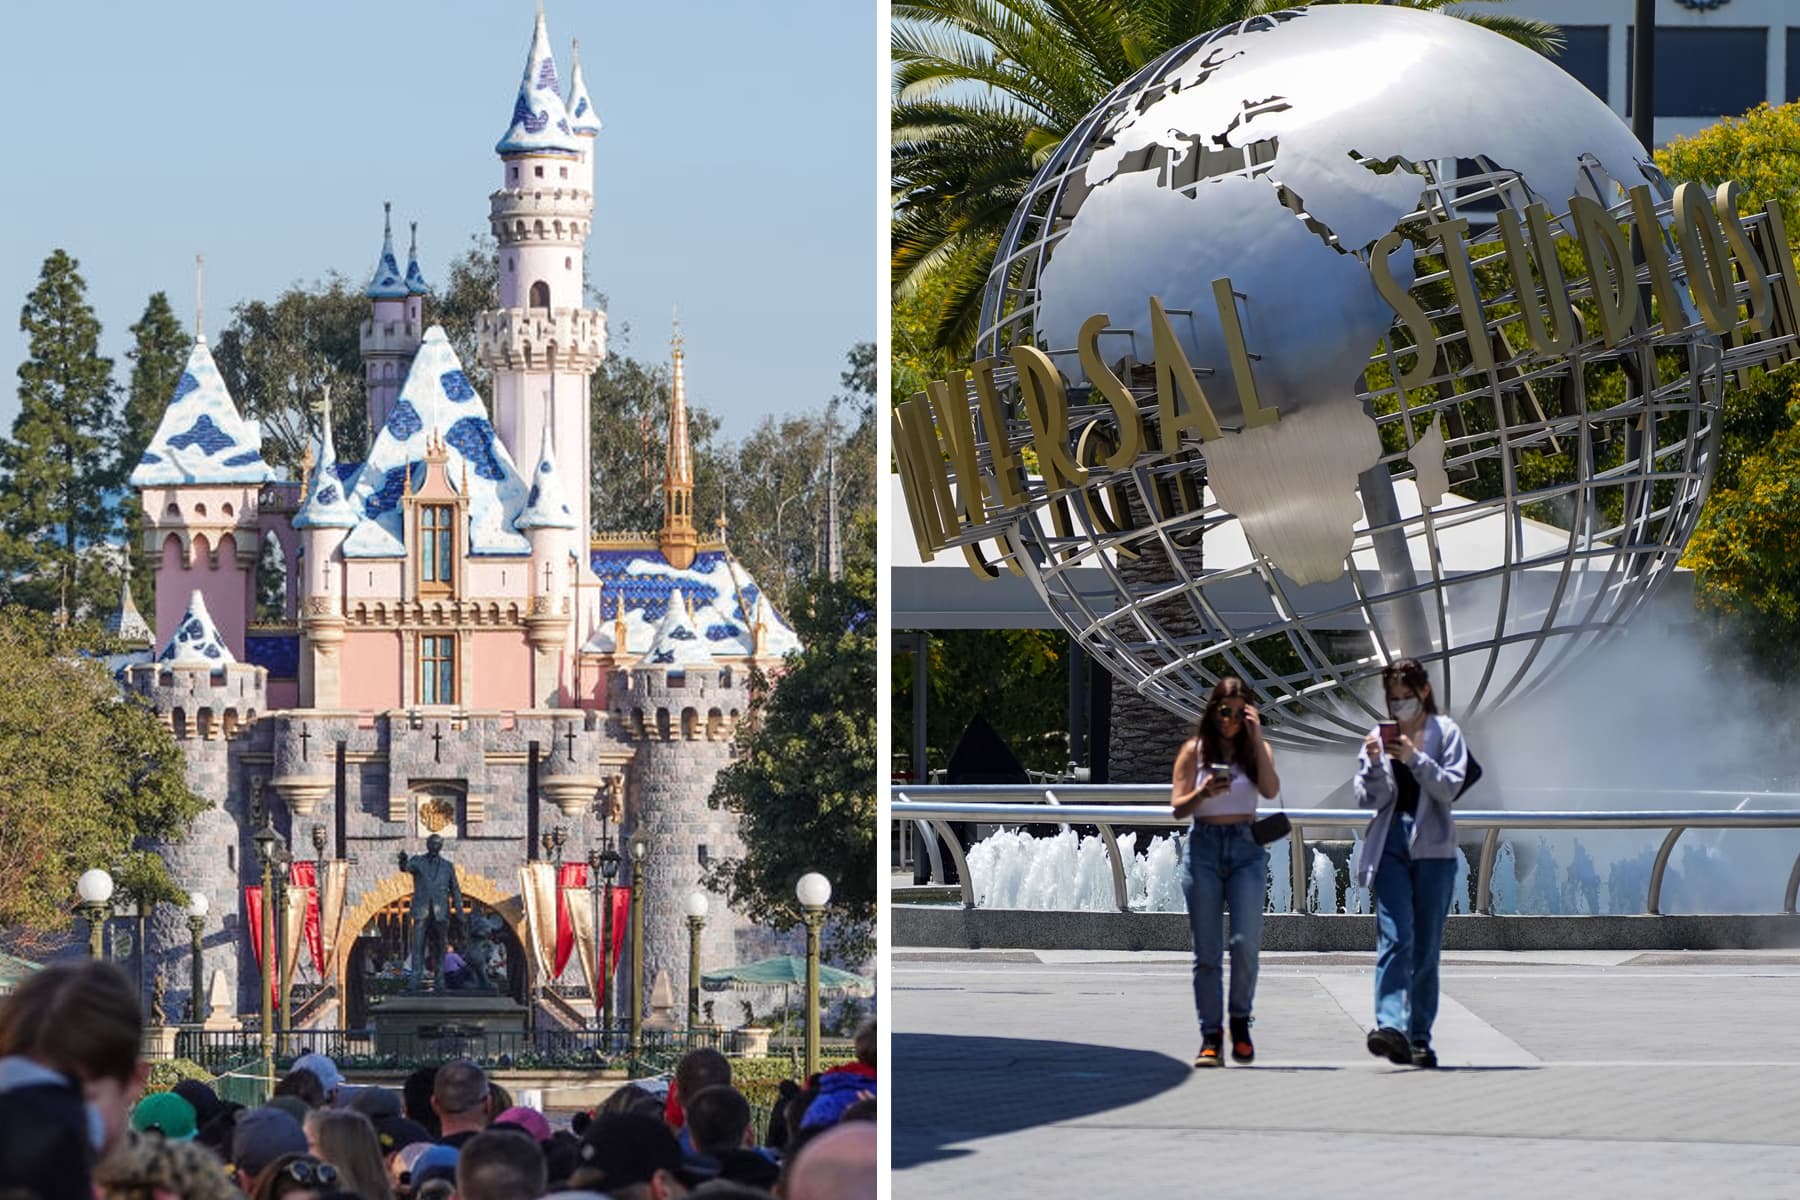 Disneyland, Common Studios openings to spice up Foremost Avenue companies